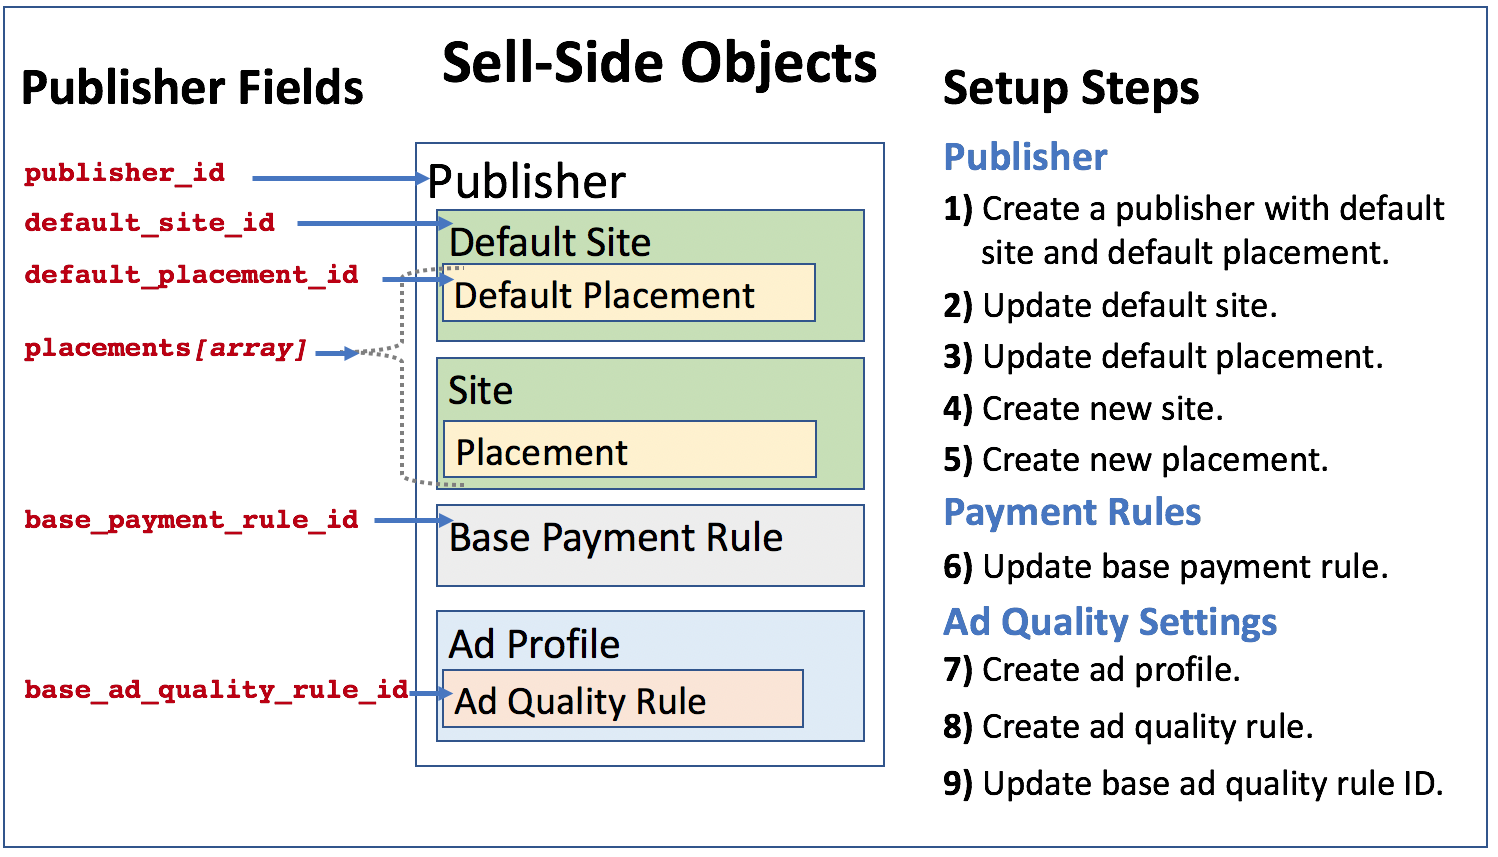 Diagram that shows the publisher fields used, sell-side objects created or configured, and setup steps for sell-side implementation.